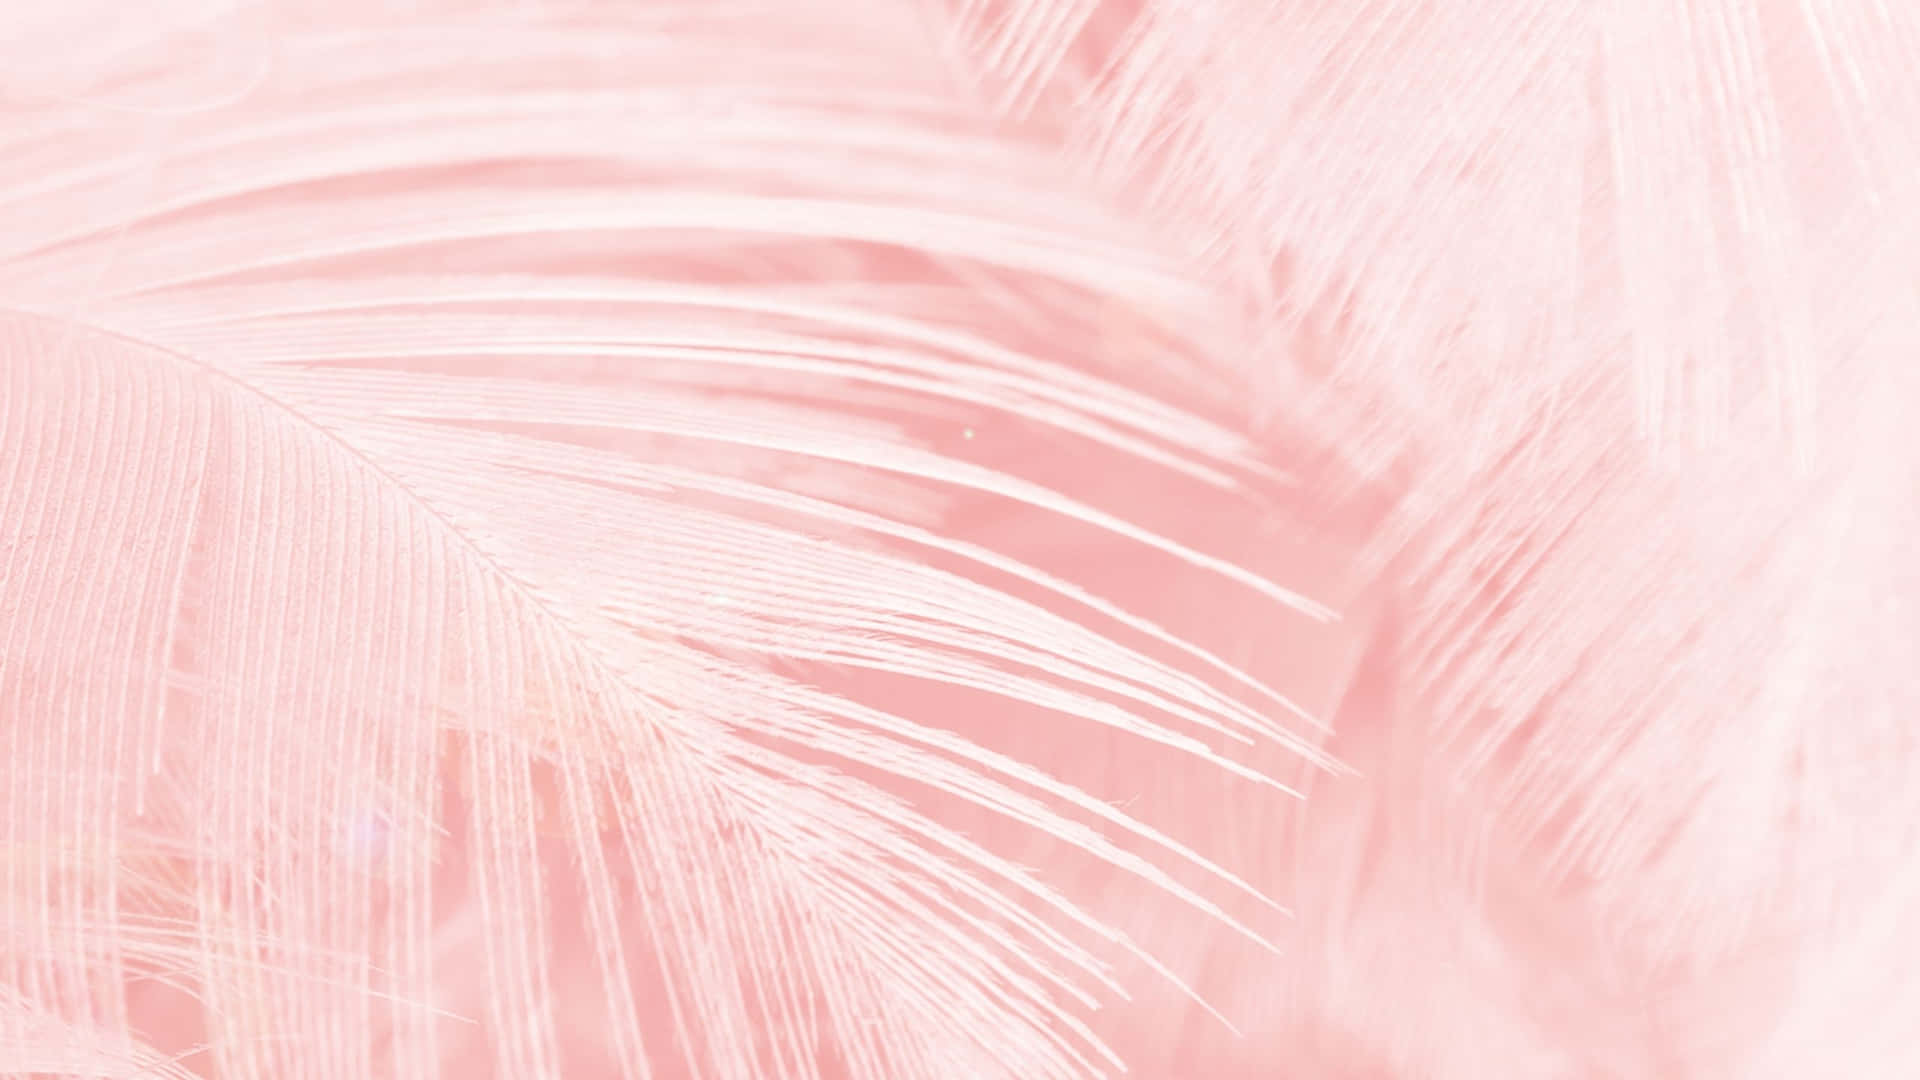 Aesthetic Computer Light Pink Feathers Wallpaper